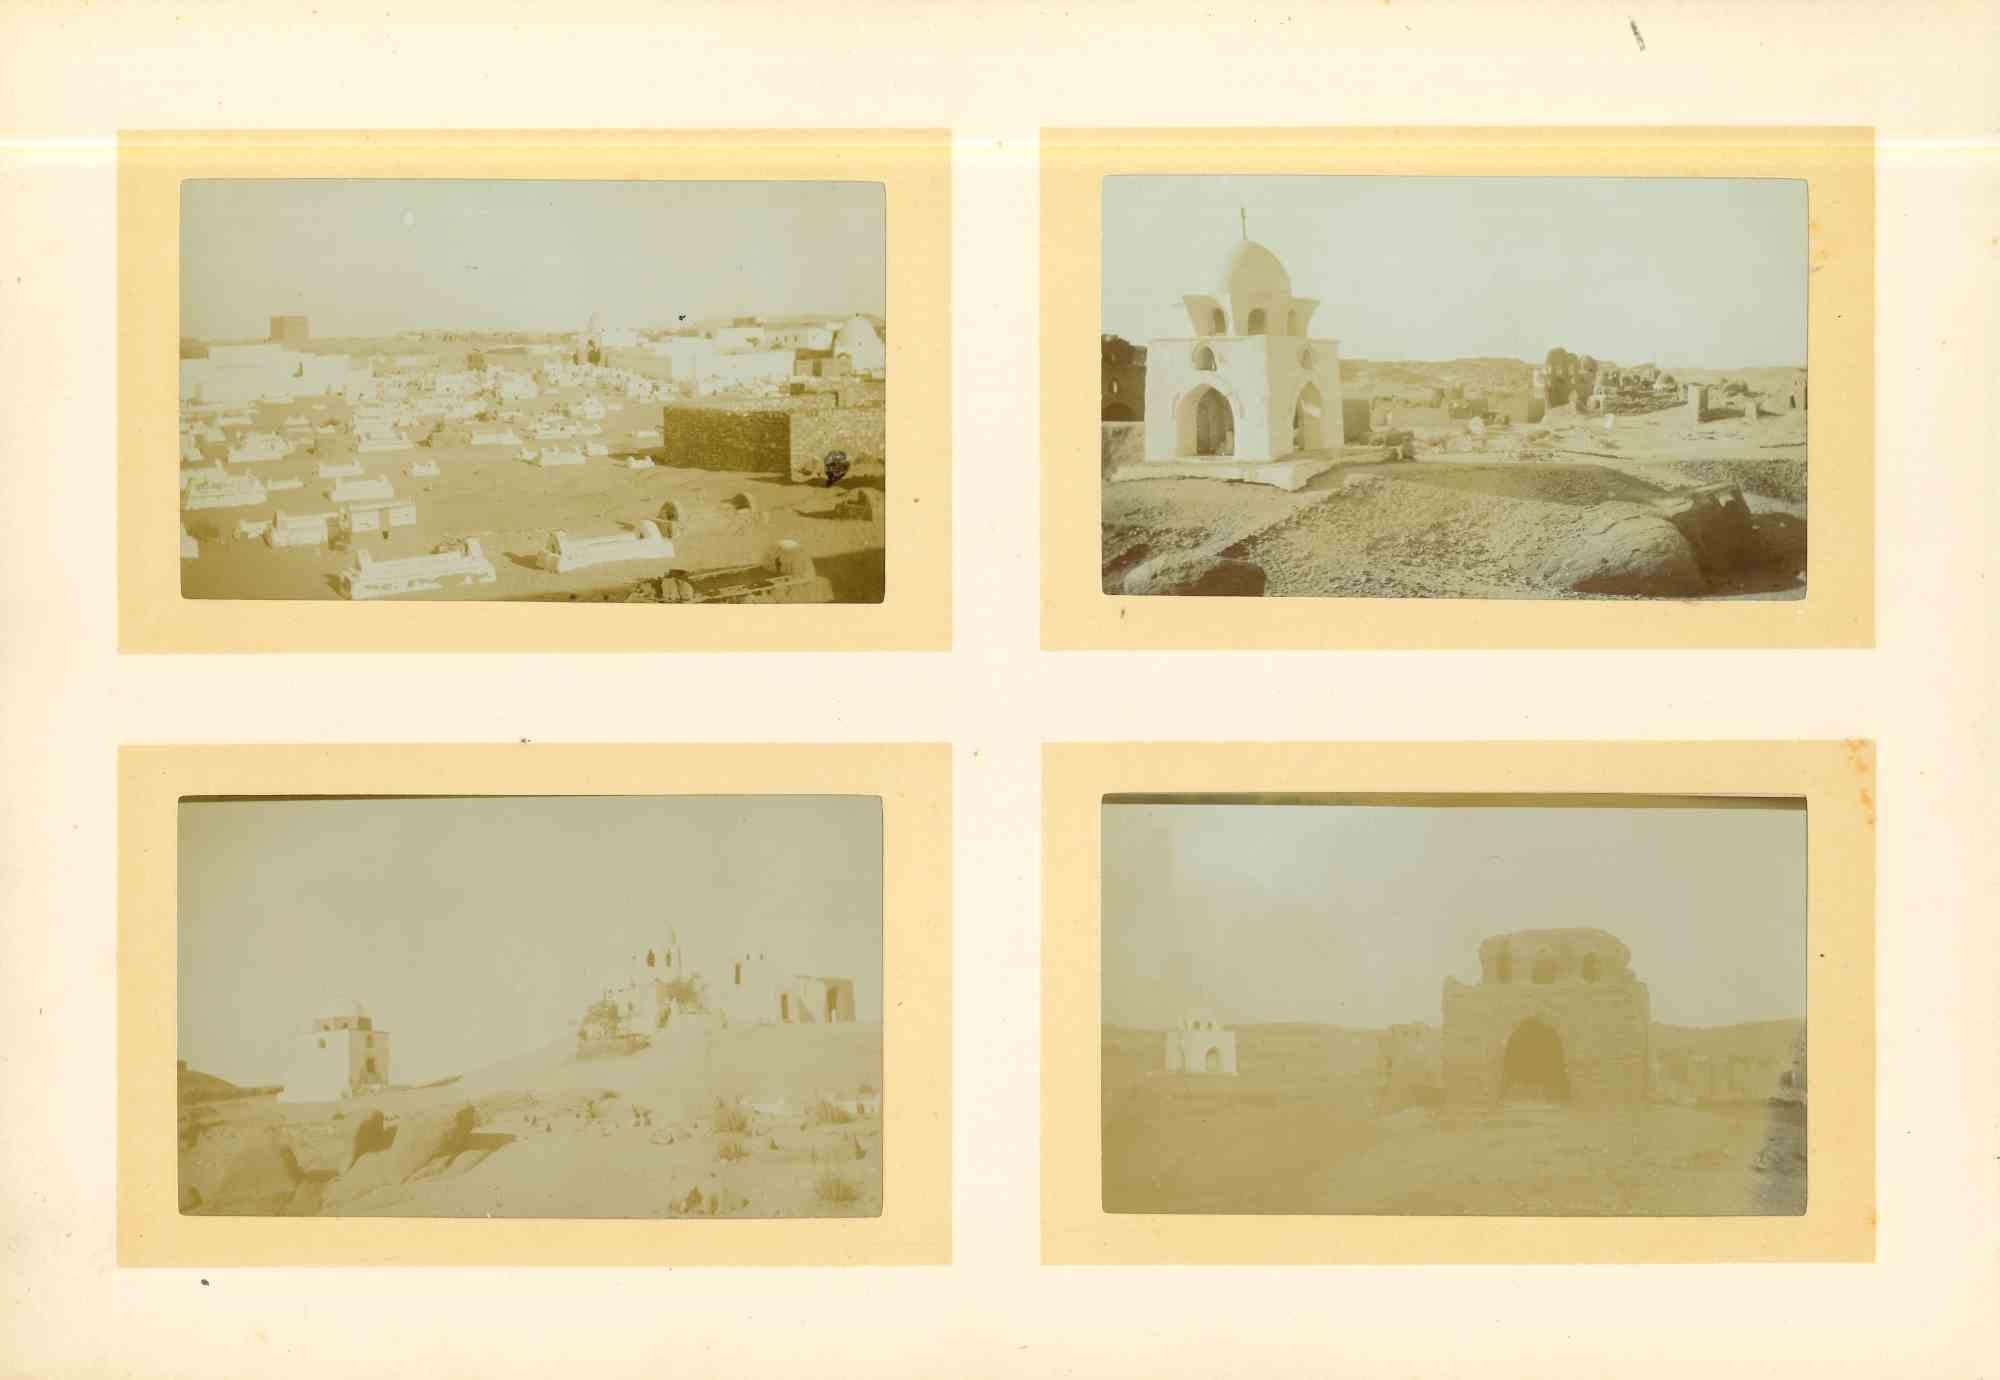 Unknown Figurative Photograph - Landscapes in Northern Africa - Vintage Photograph - Early 20th Century